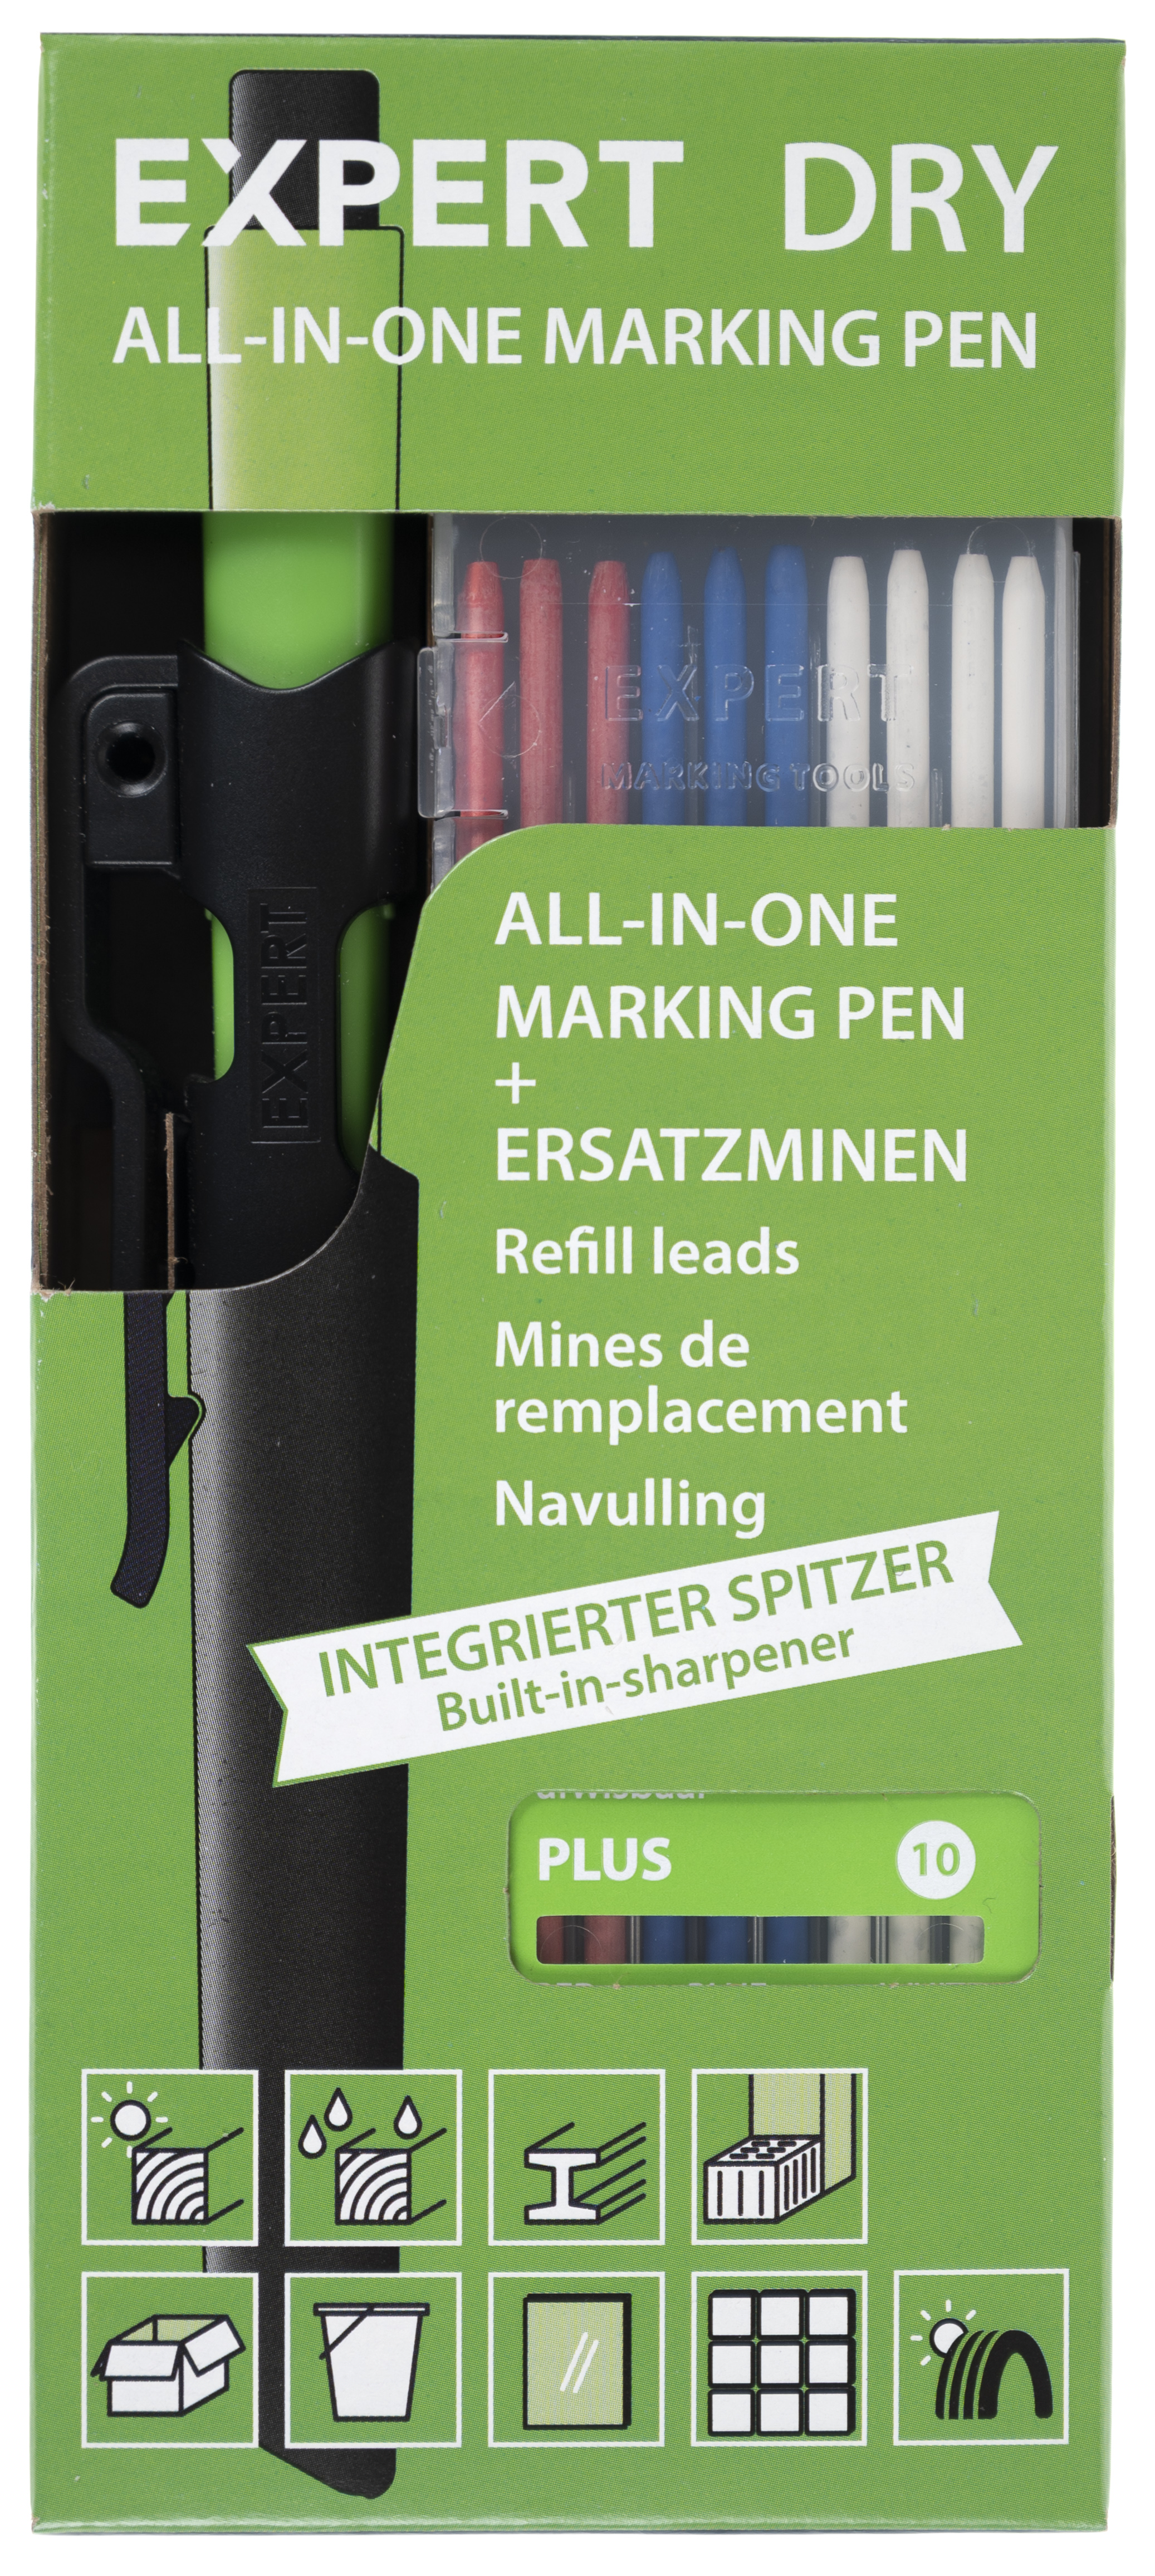 EXPERT DRY ALL-IN-ONE with Plus-Mine-Set